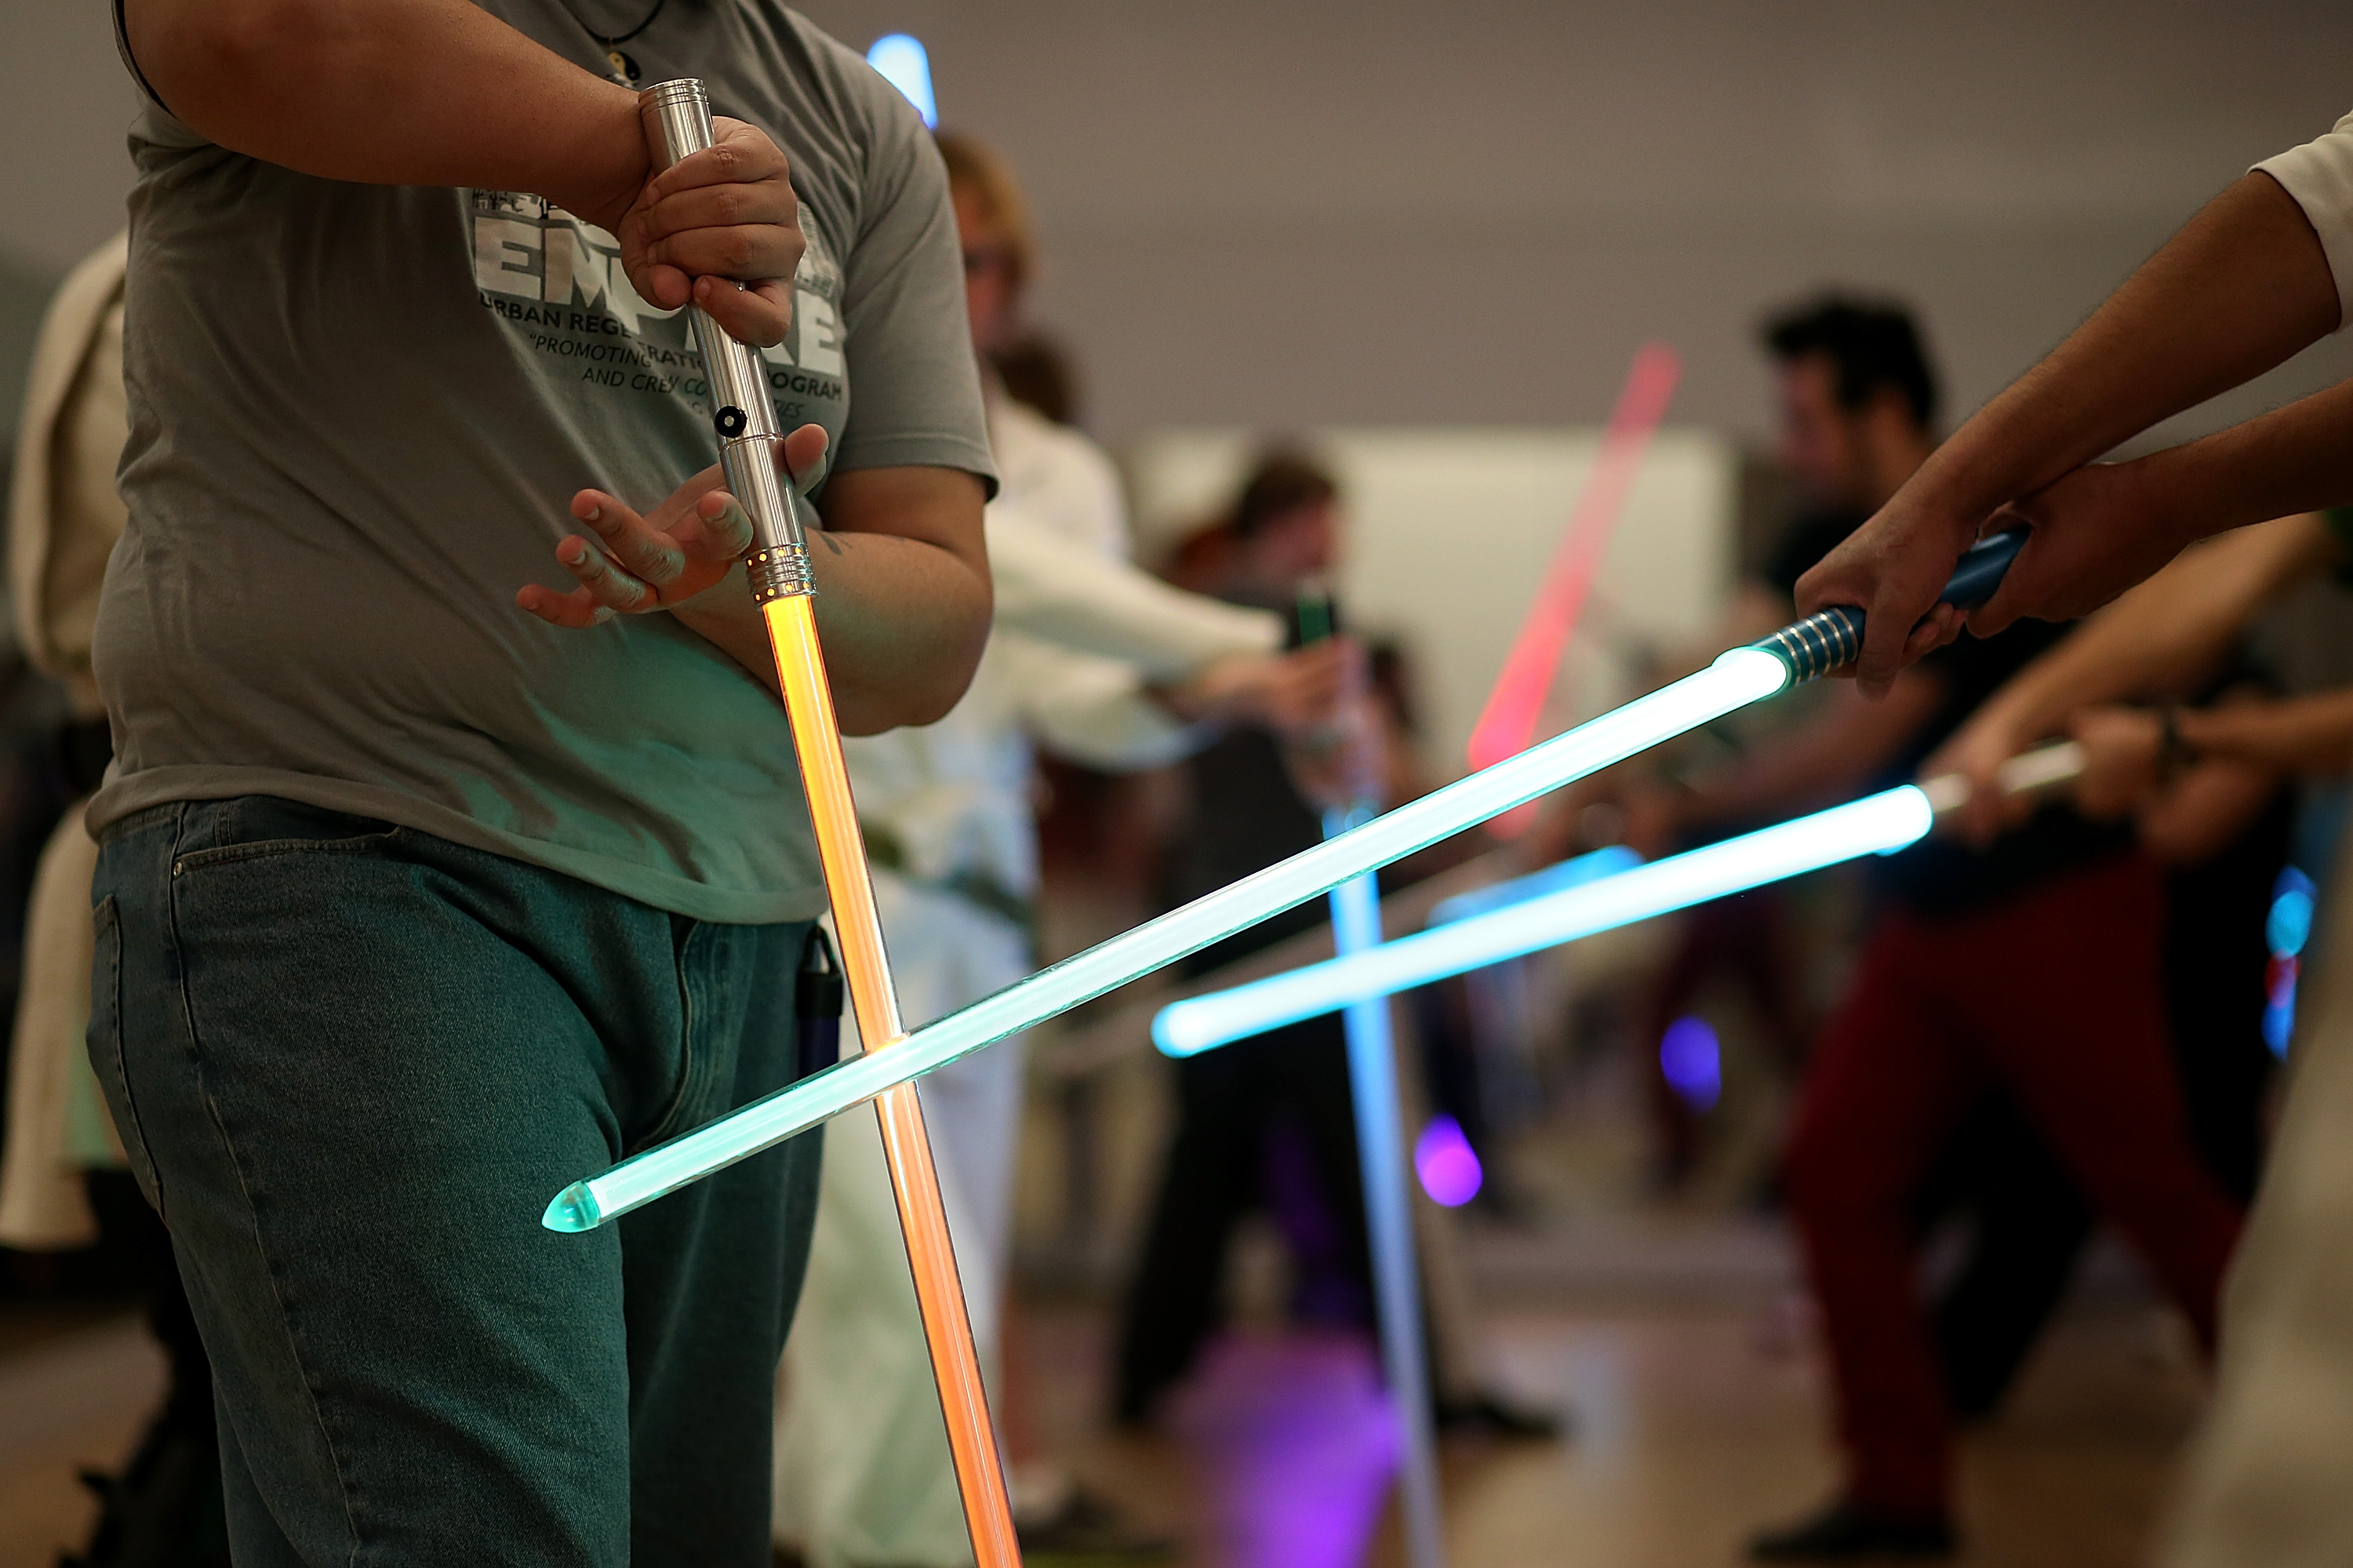 Students perform combat moves using lightsabers during a Golden Gate Knights class in saber choreography on February 24, 2013 in San Francisco. (Justin Sullivan—Getty Images)